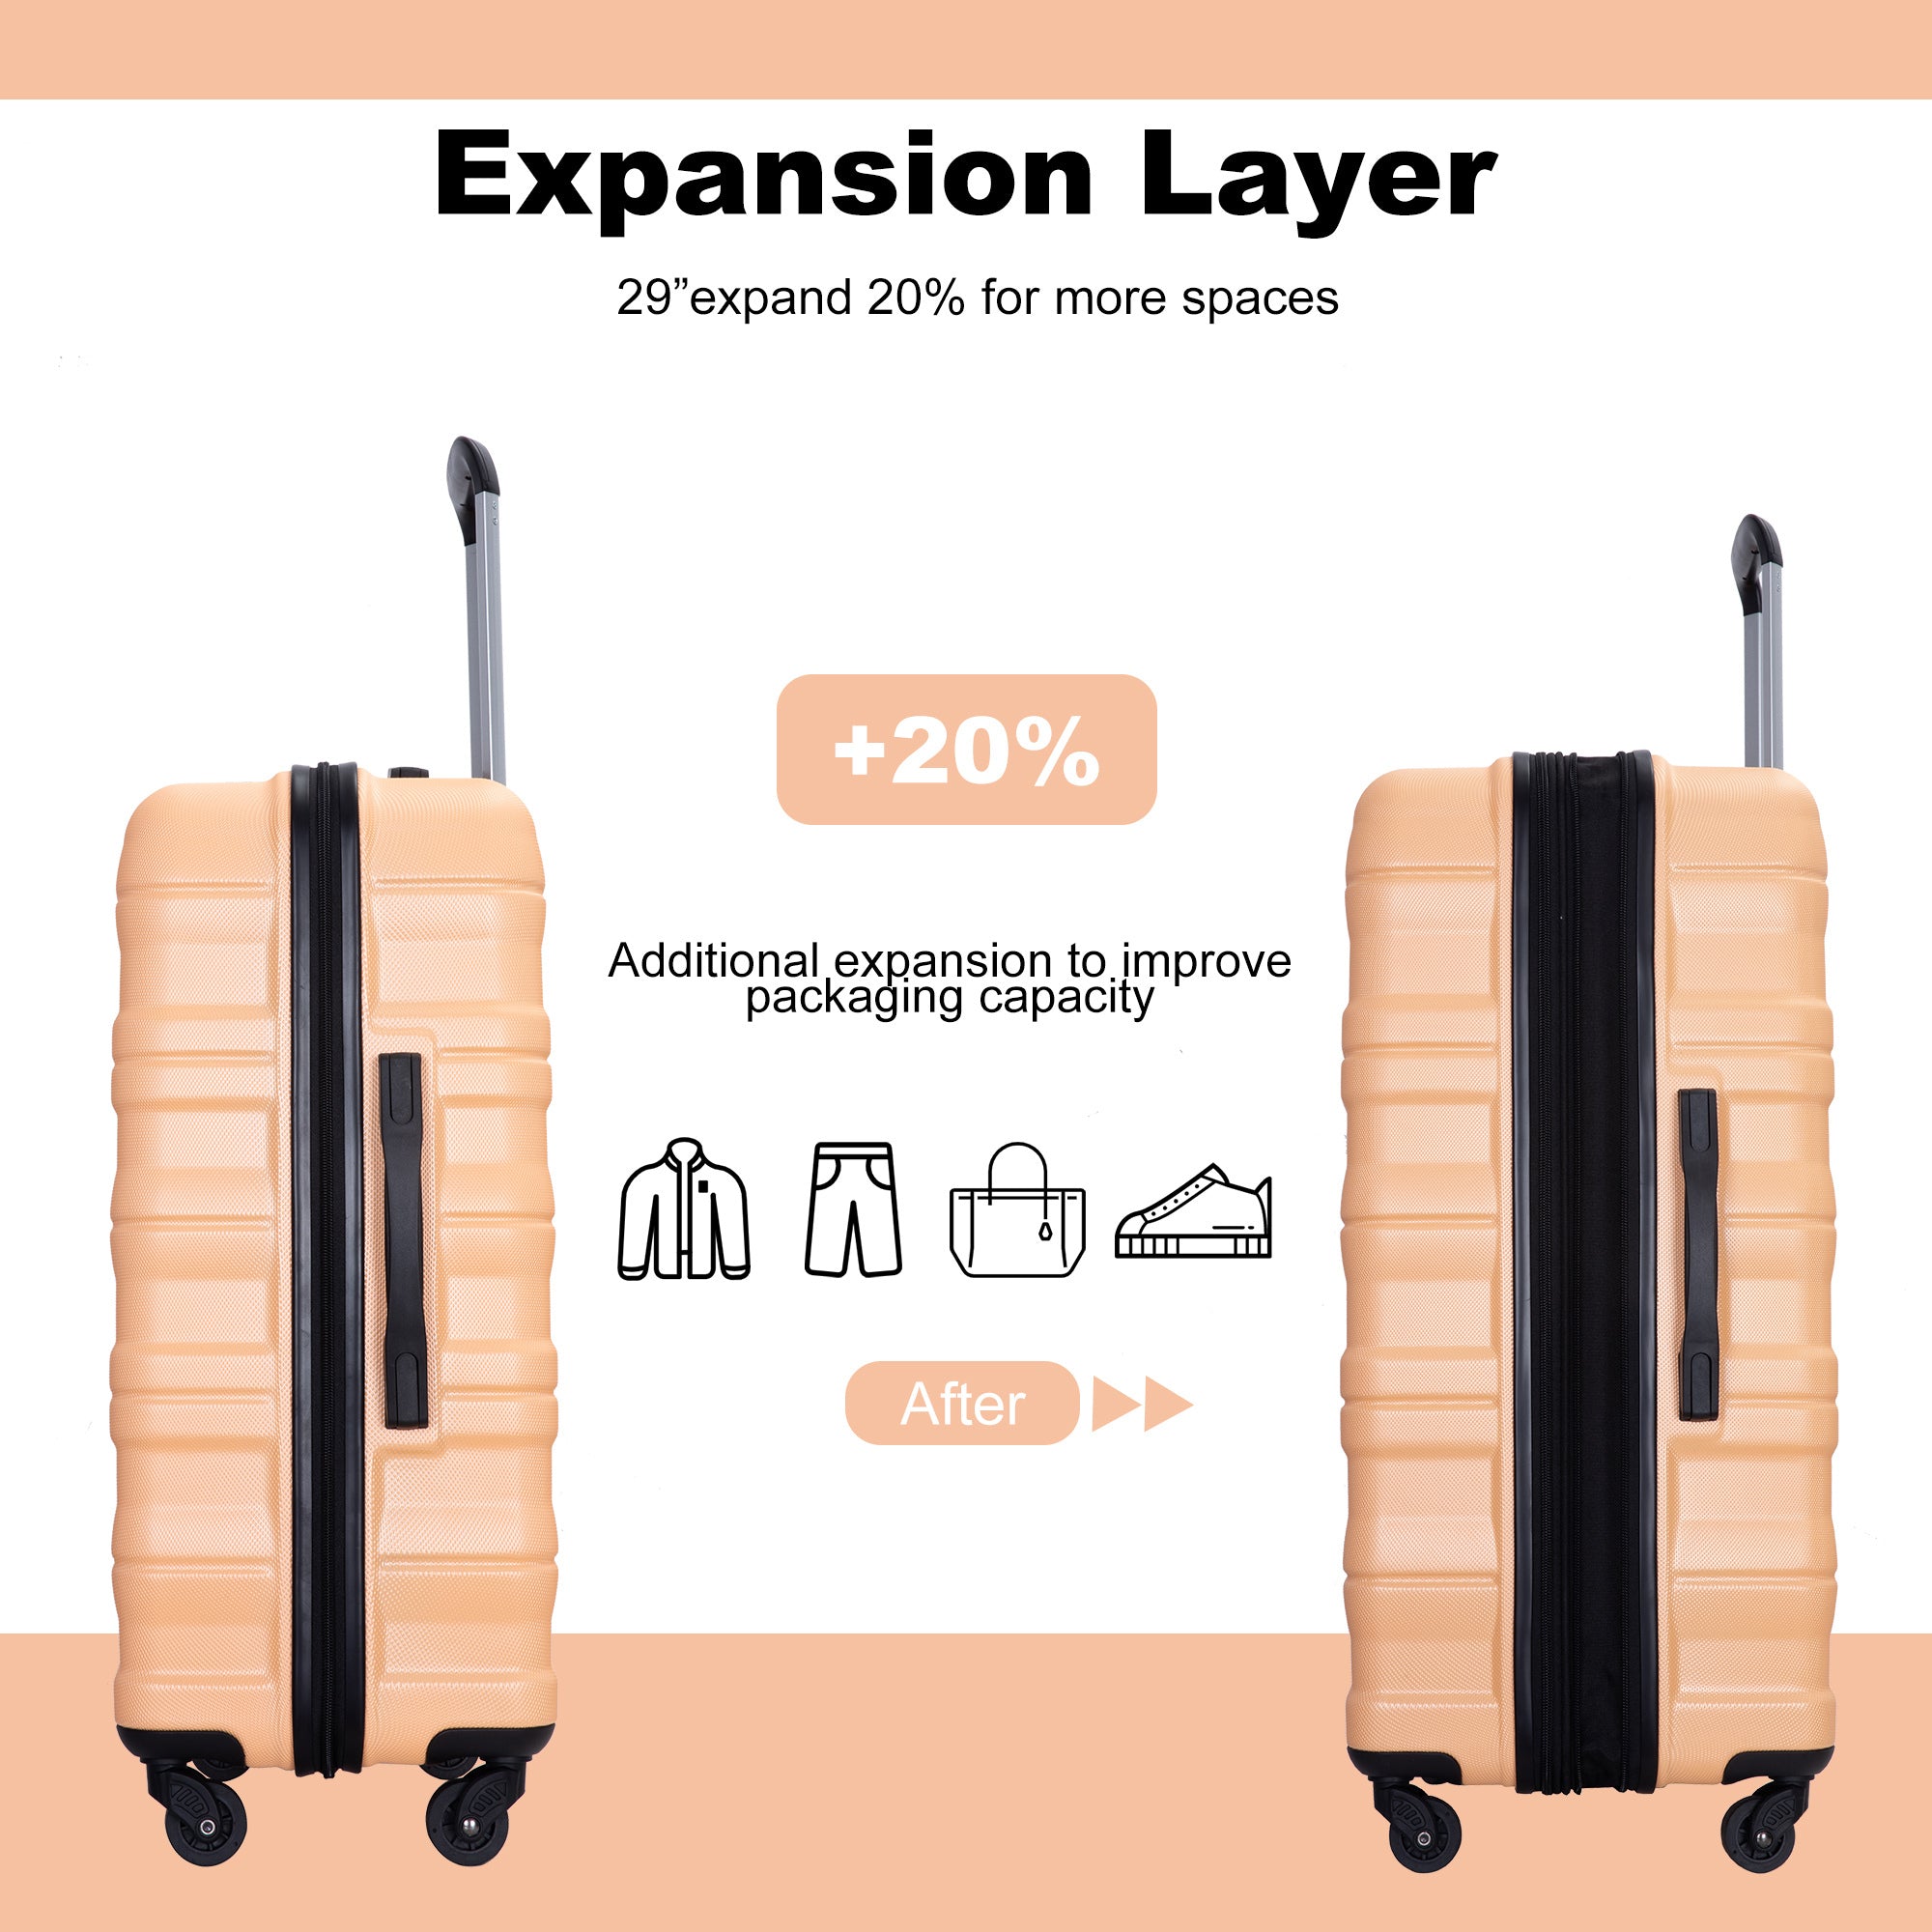 Expandable 3 Piece Luggage Sets PC Lightweight & peach-pc